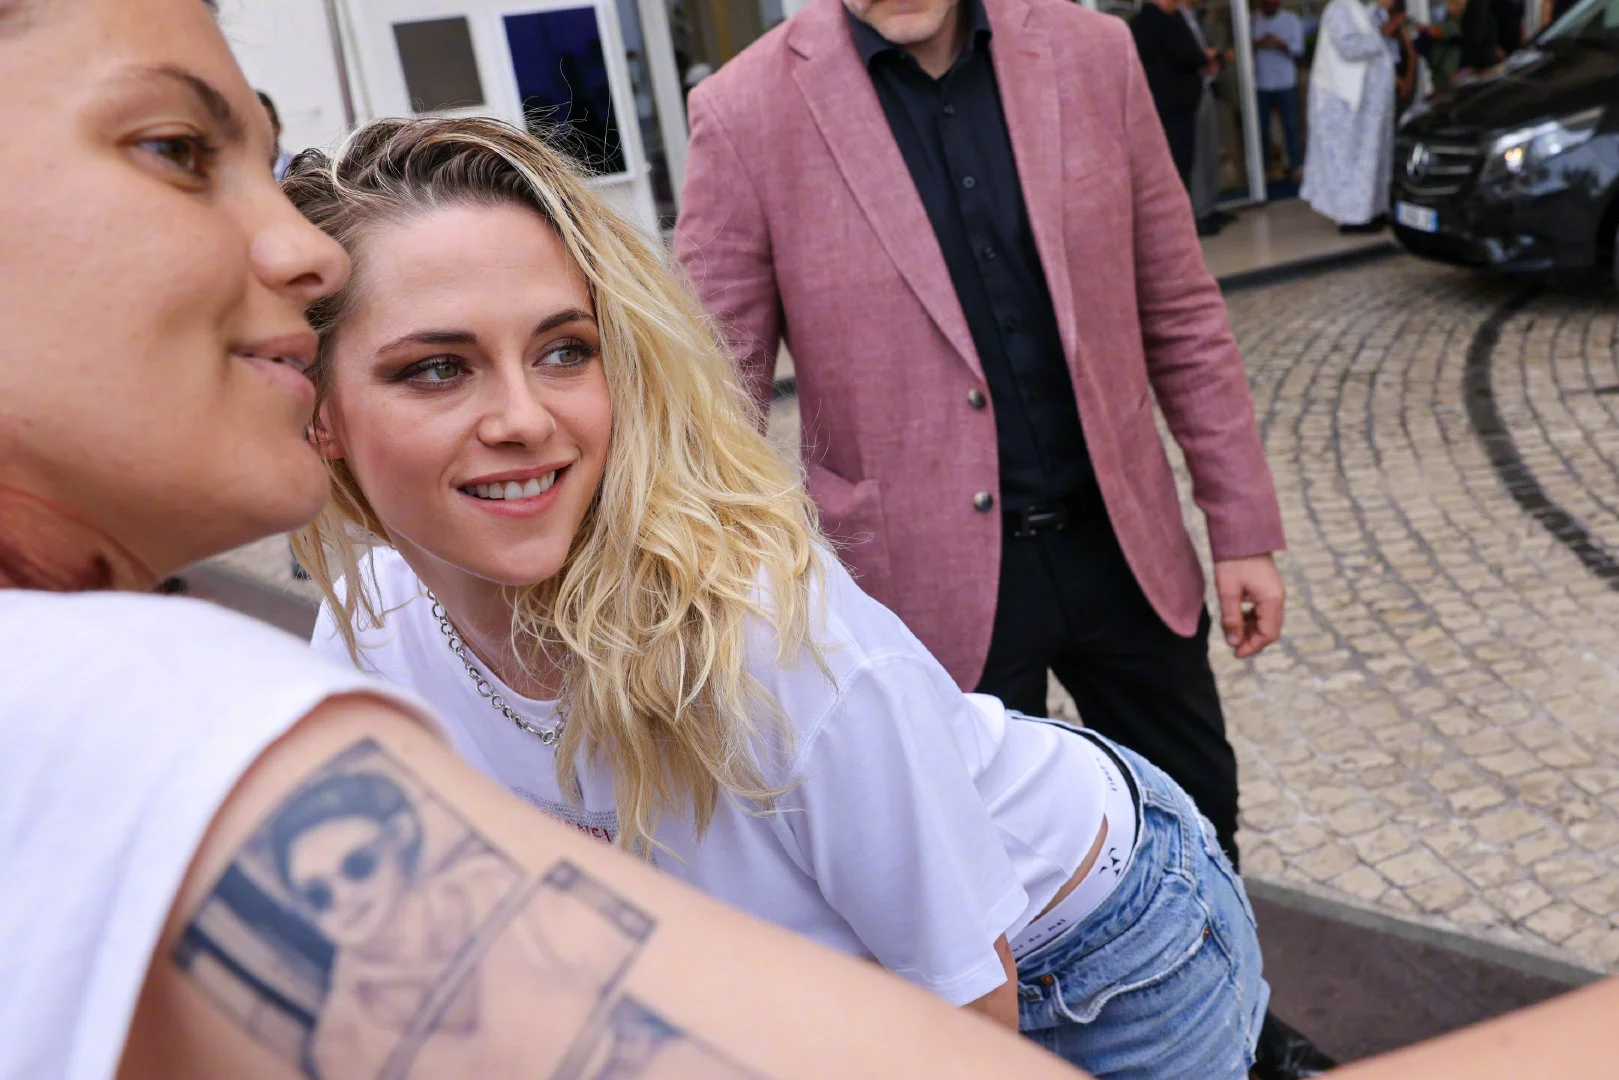 Kristen Stewart appears in Cannes, posing with fans on the way